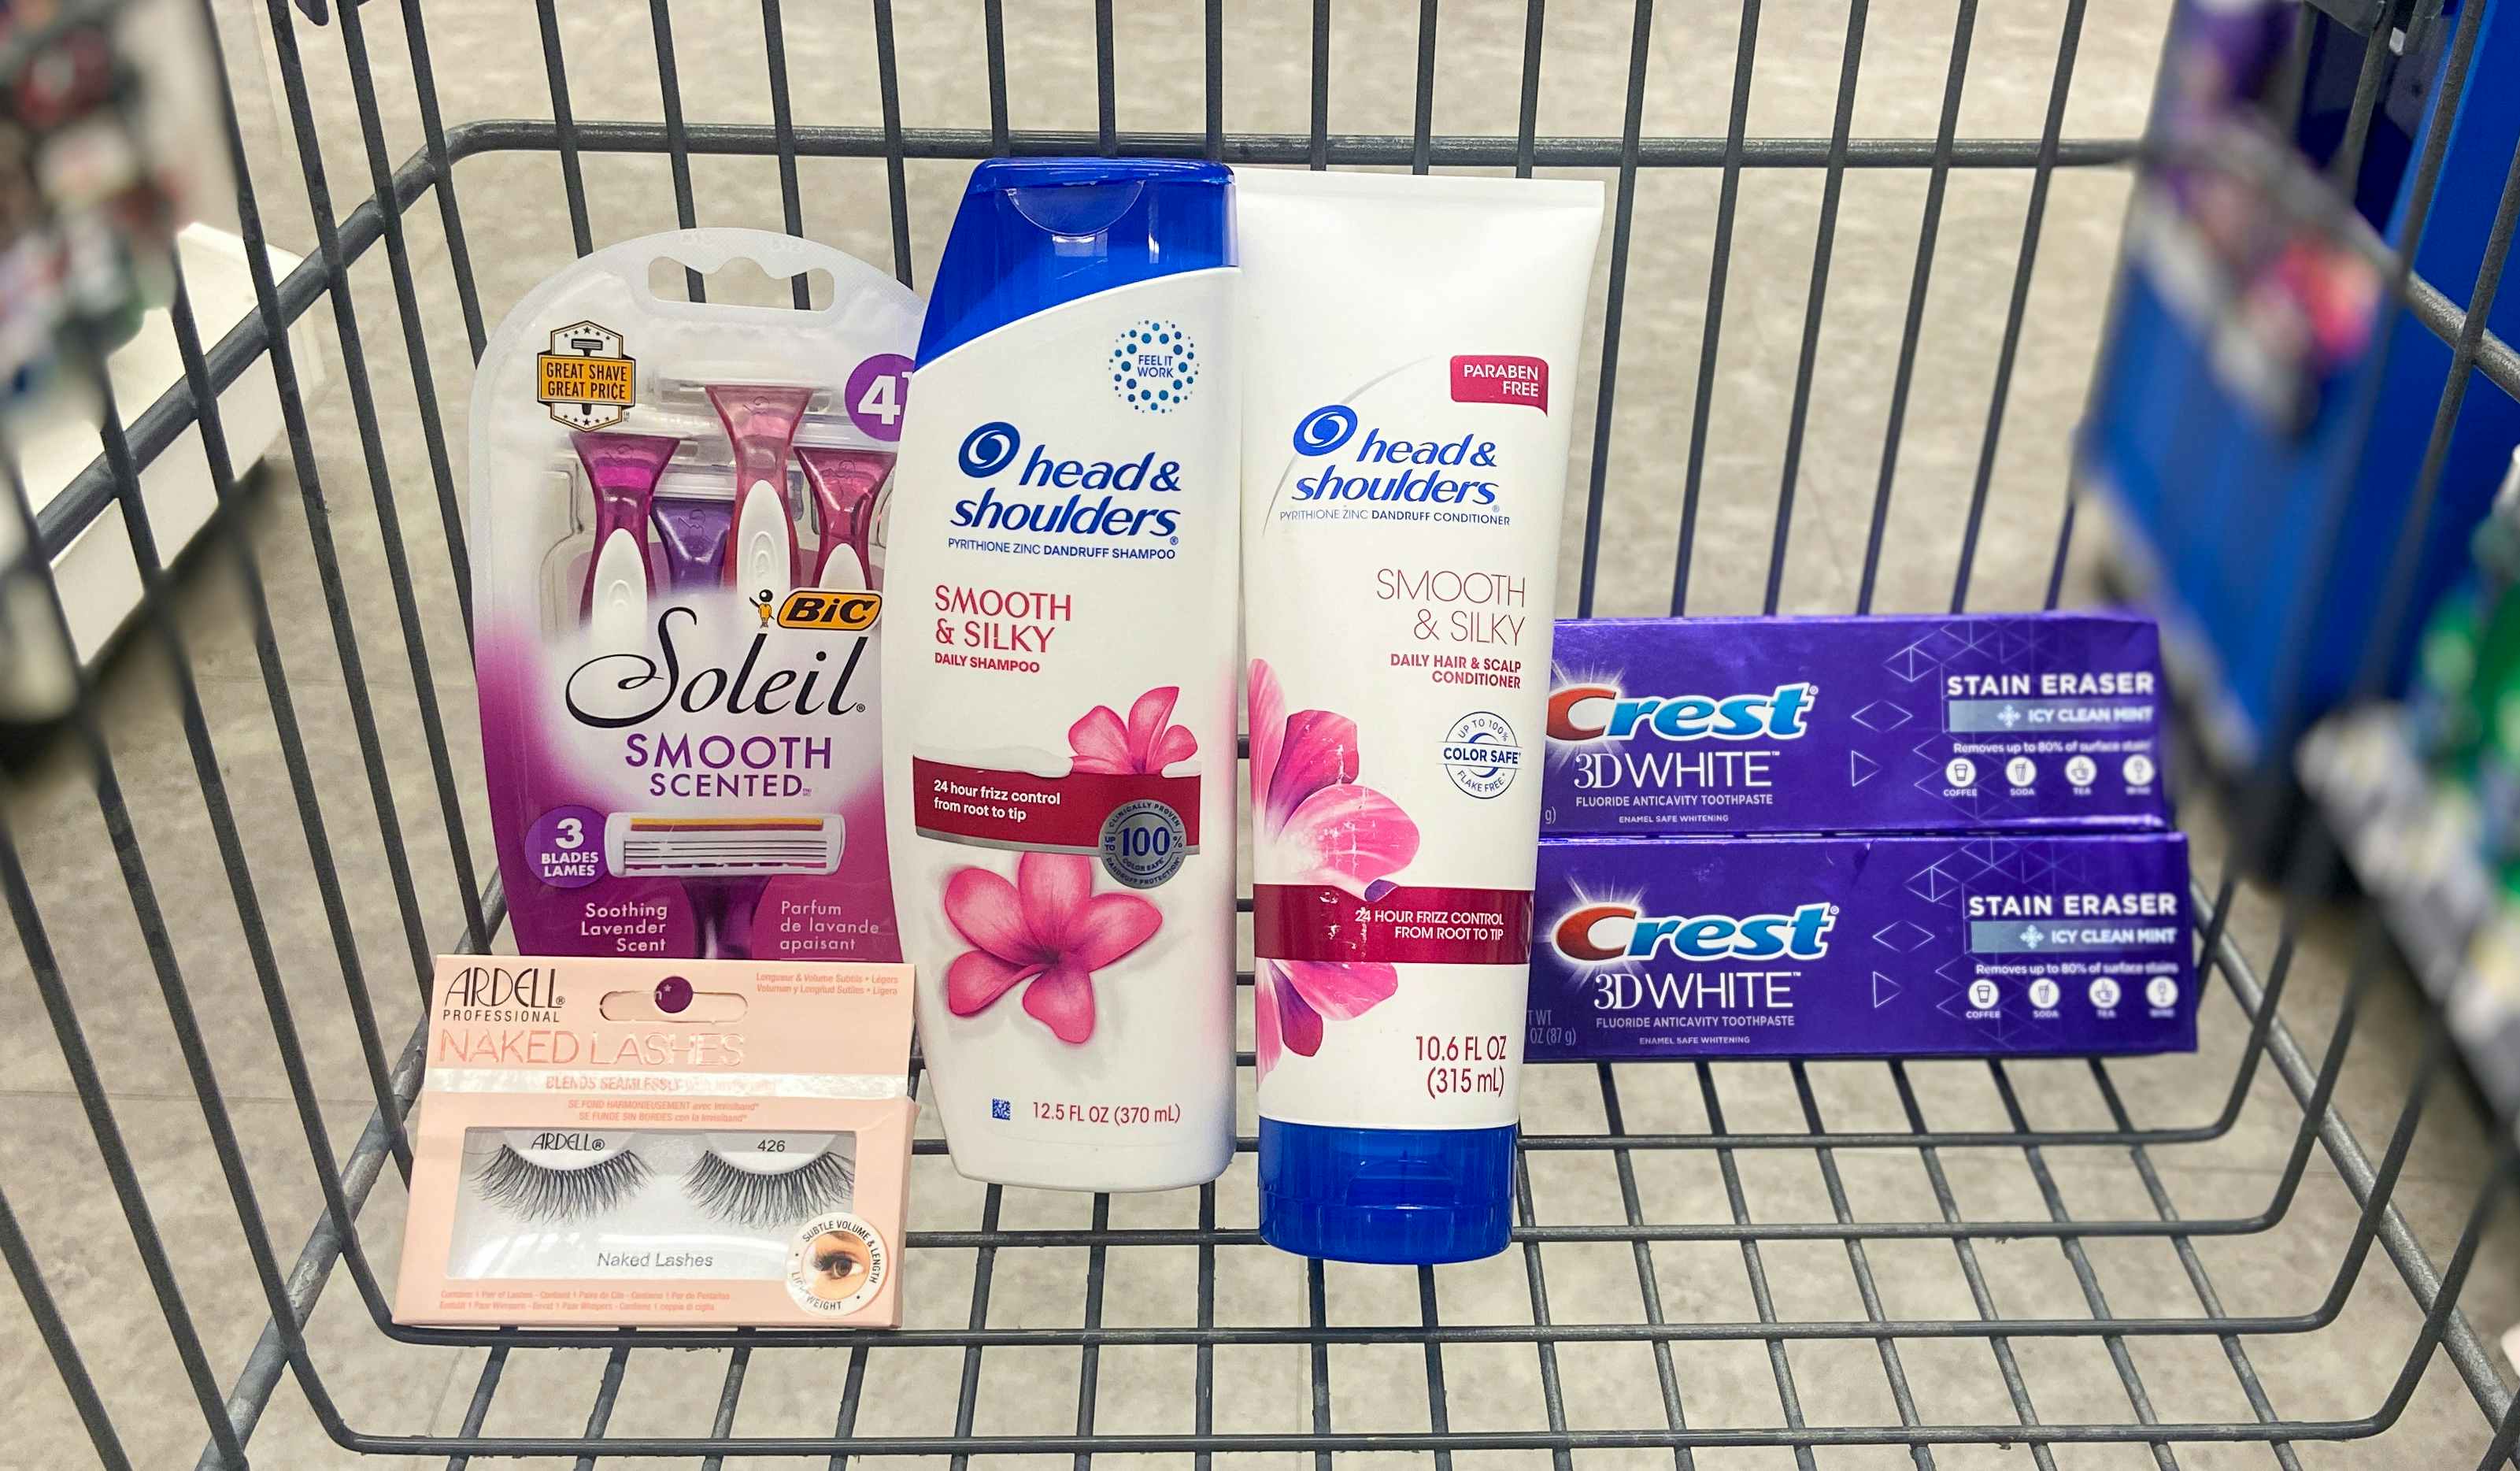 walgreens cart with head & shoulders shampoo, crest toothpaste, bic razors, and ardell false lashes